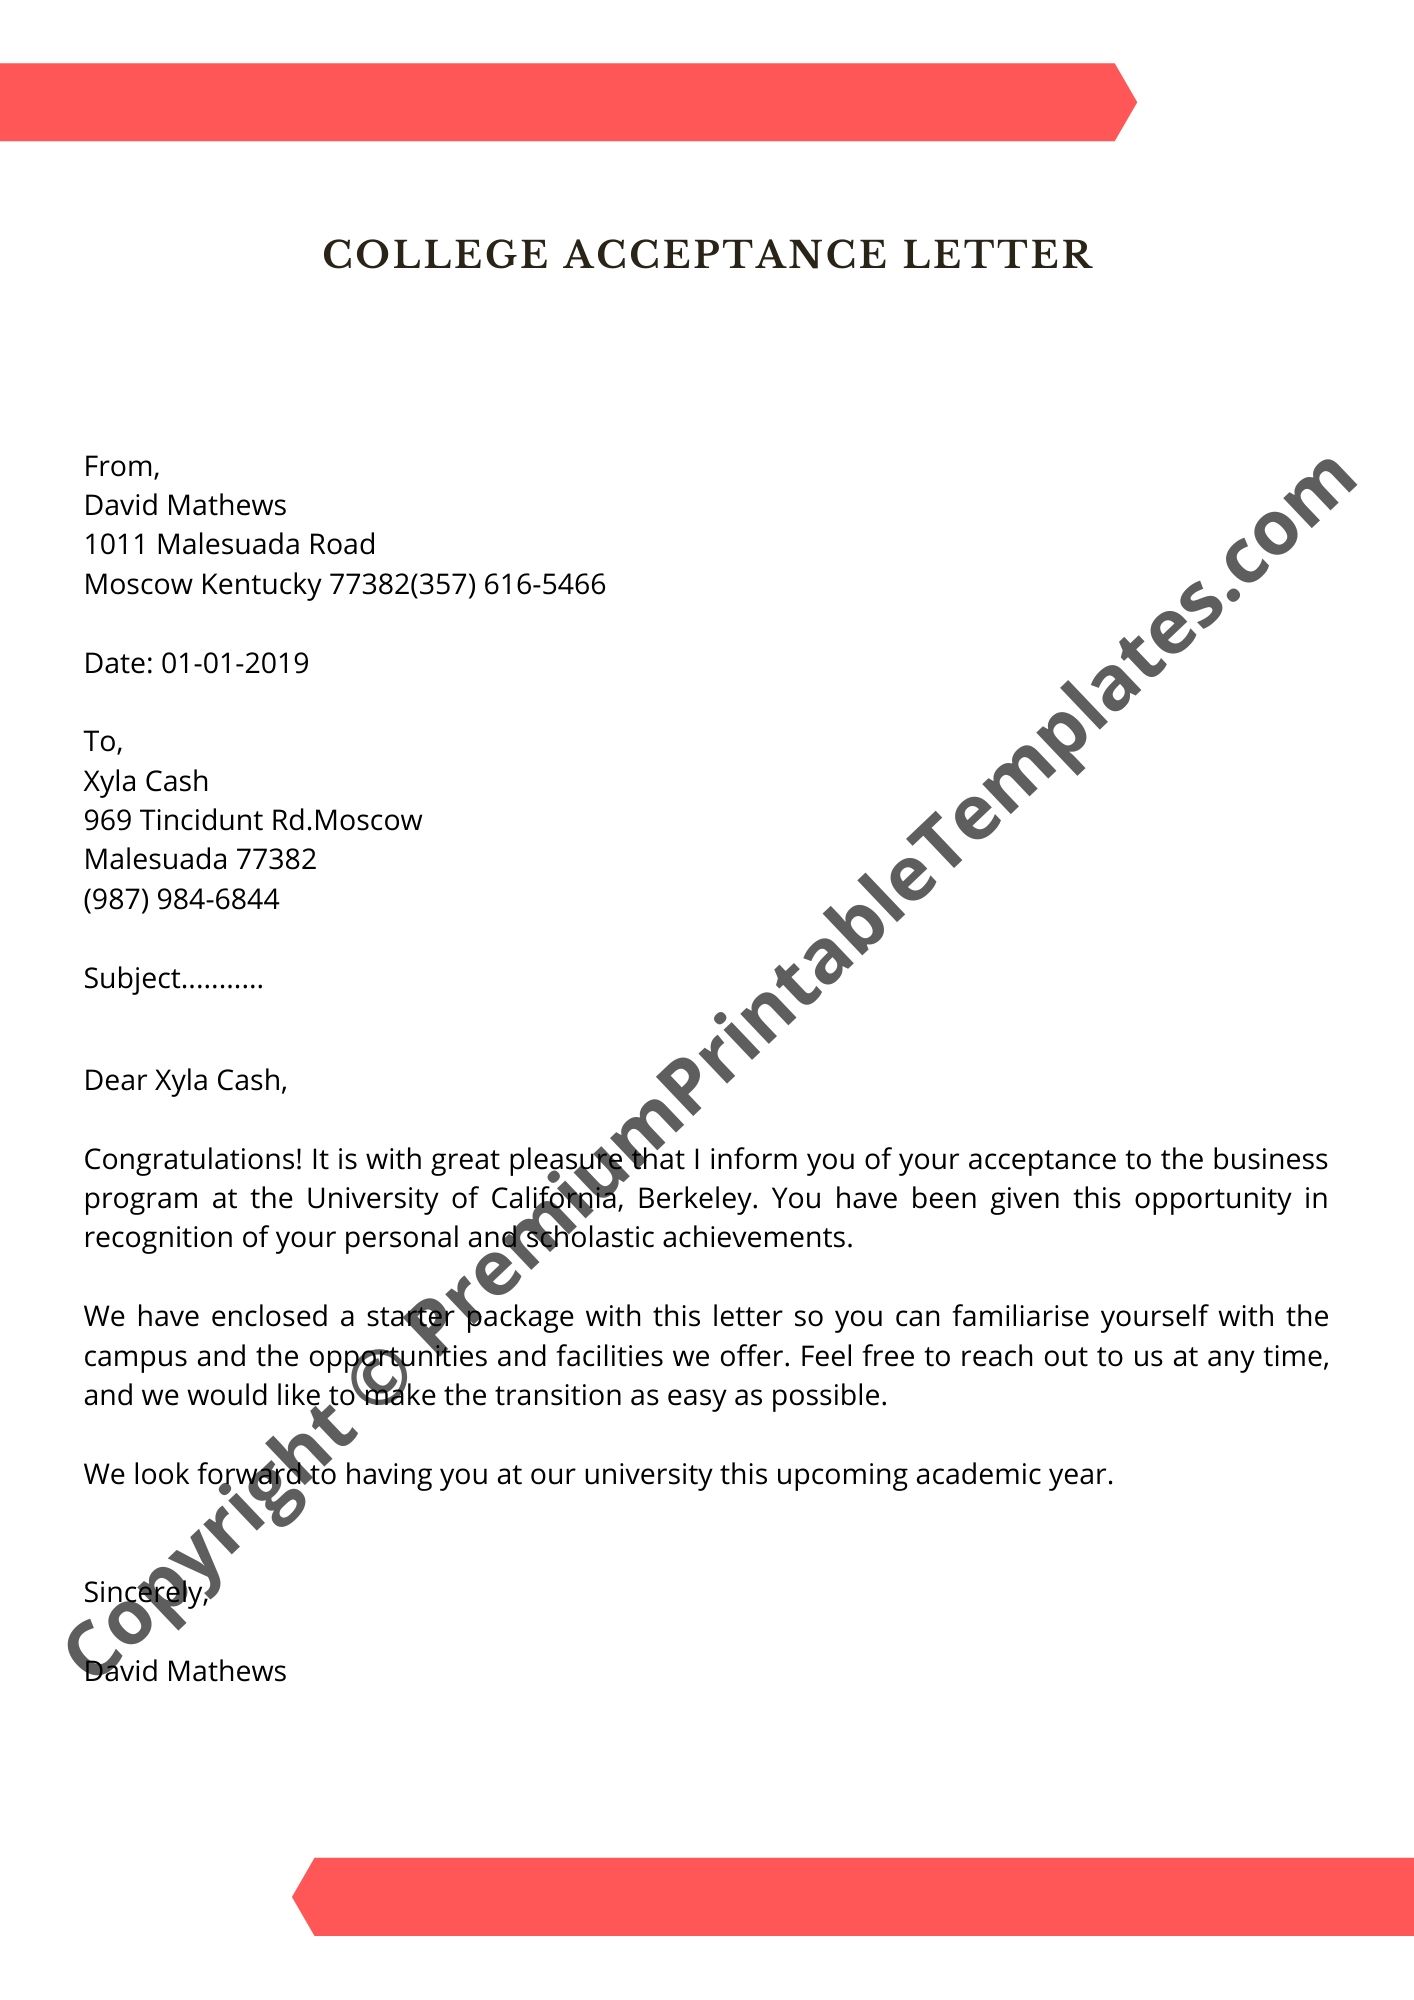 College Acceptance Letter Template